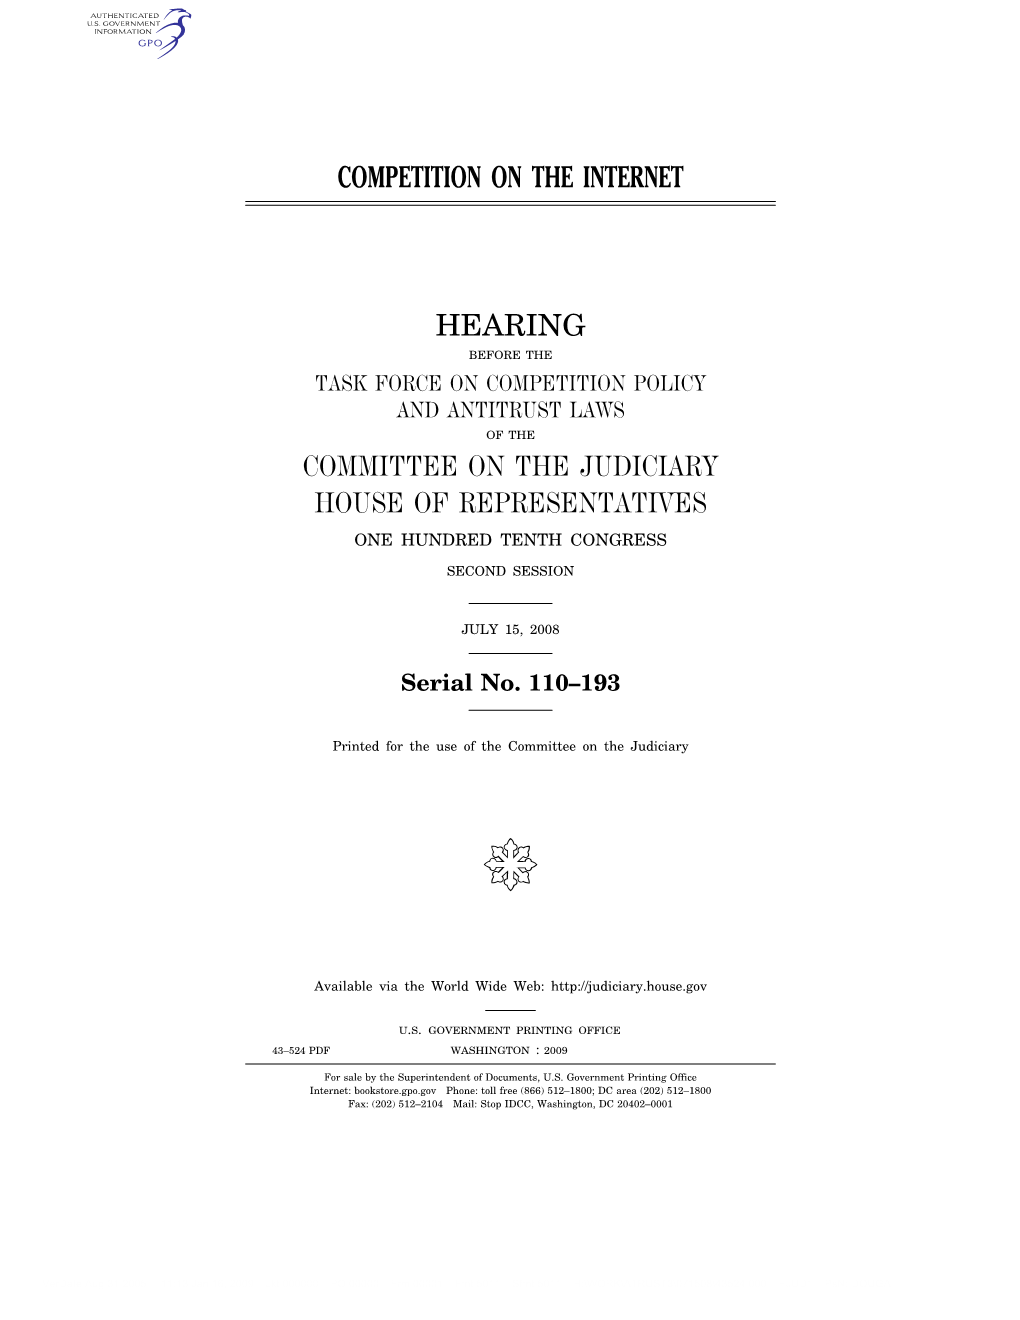 Competition on the Internet Hearing Committee On